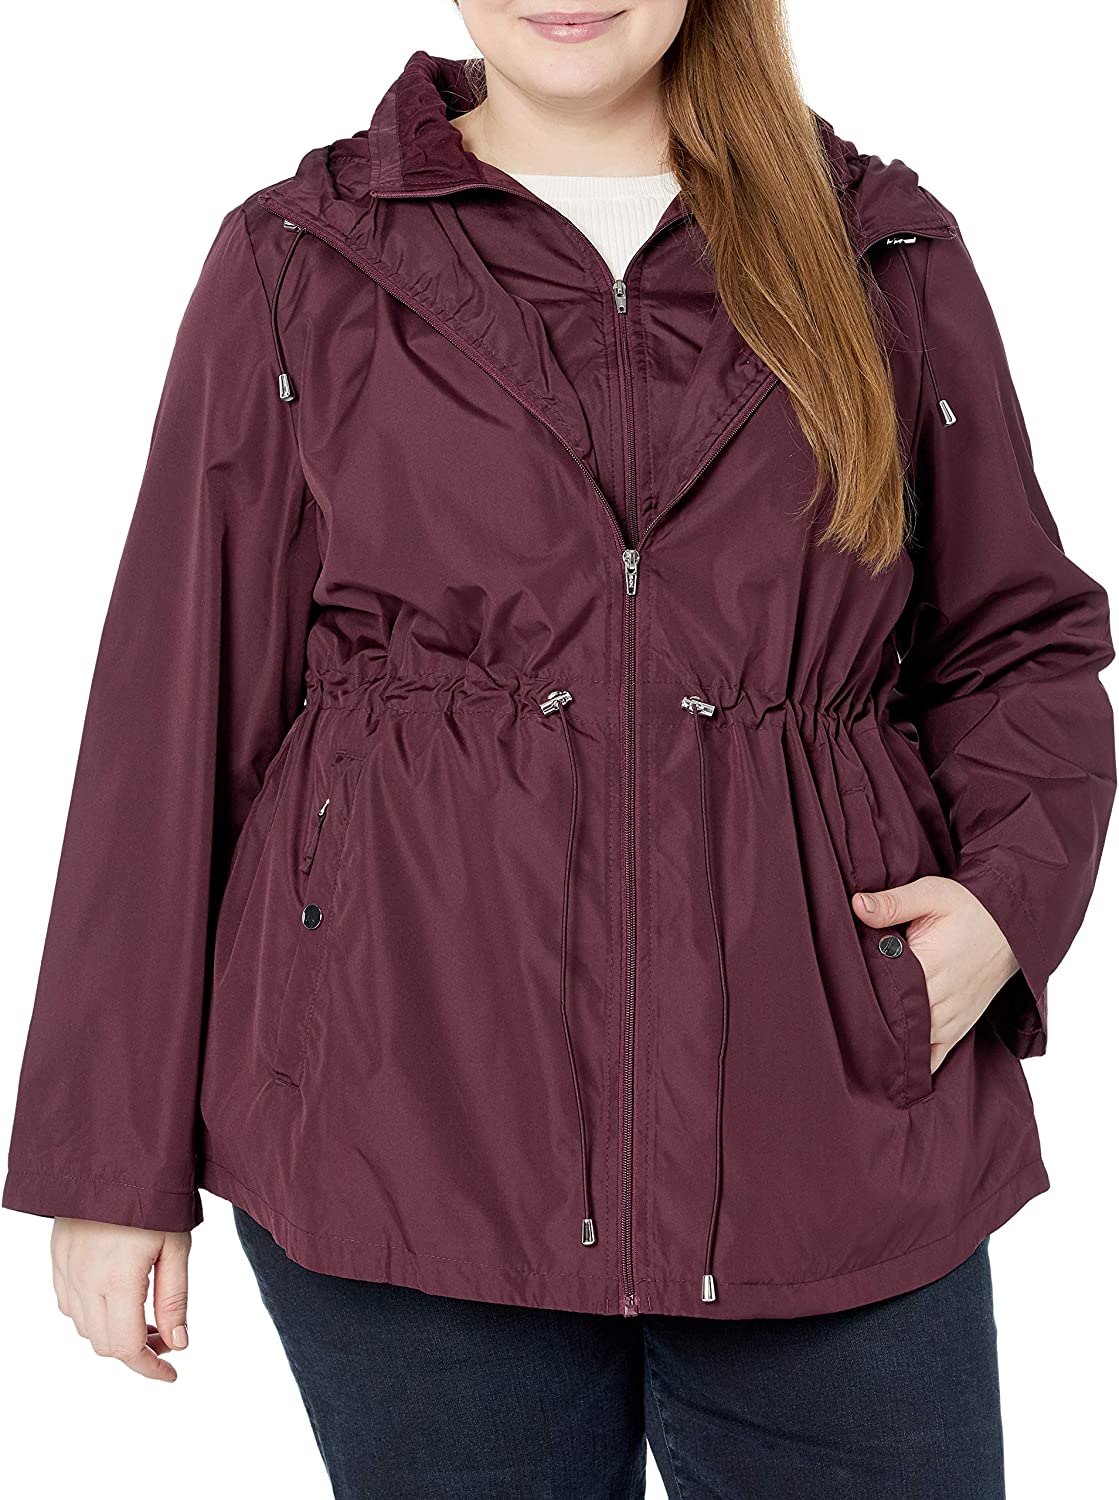 Details Womens Lightweight Pack-it-in-a-Pouch Water-Resistant Jacket